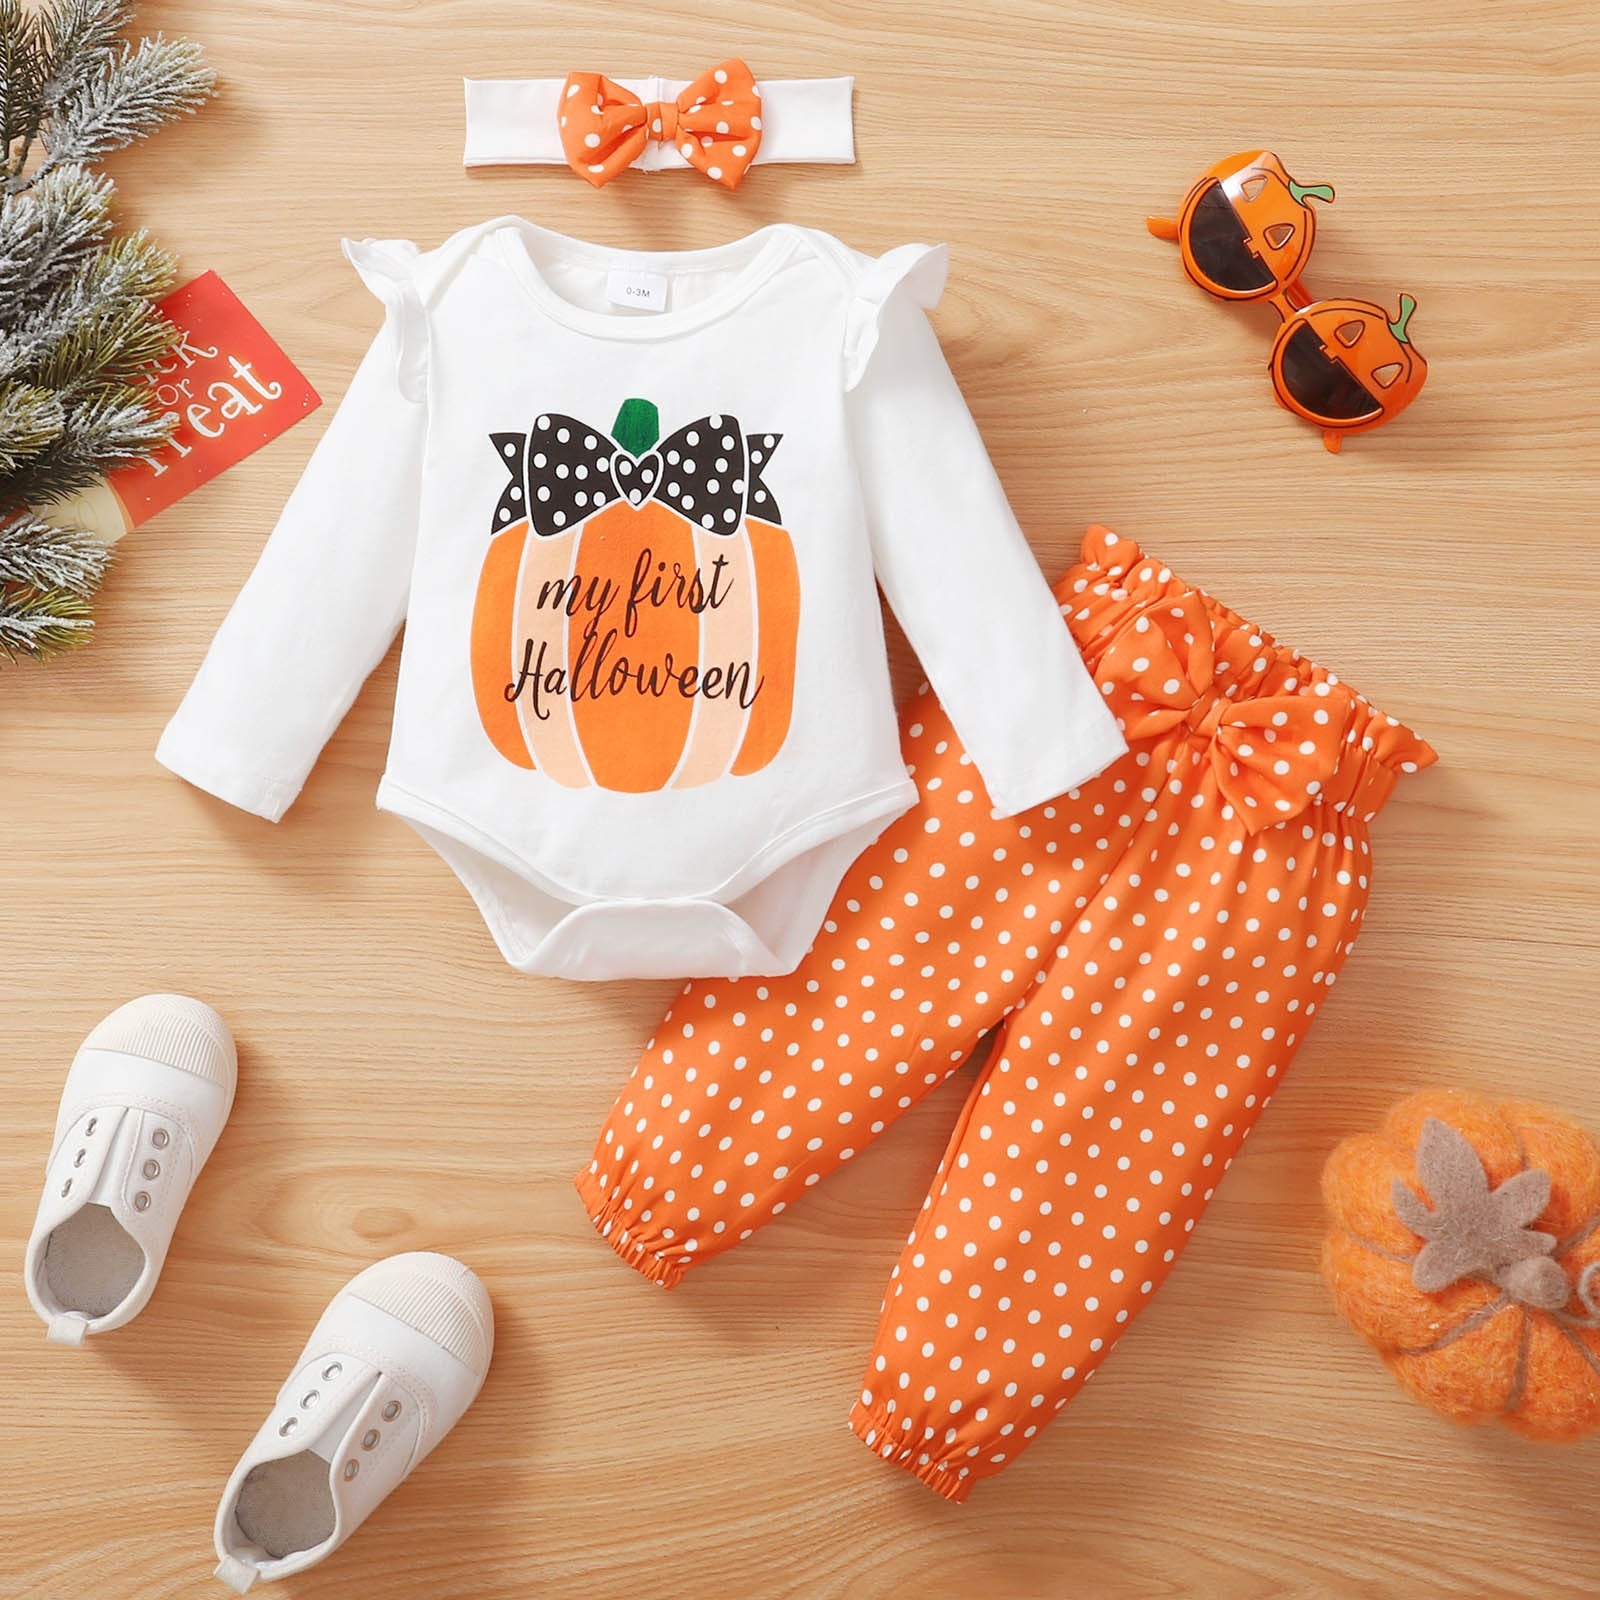 Celebrate Baby's First Halloween with Our Adorable 3-Piece Outfit Set